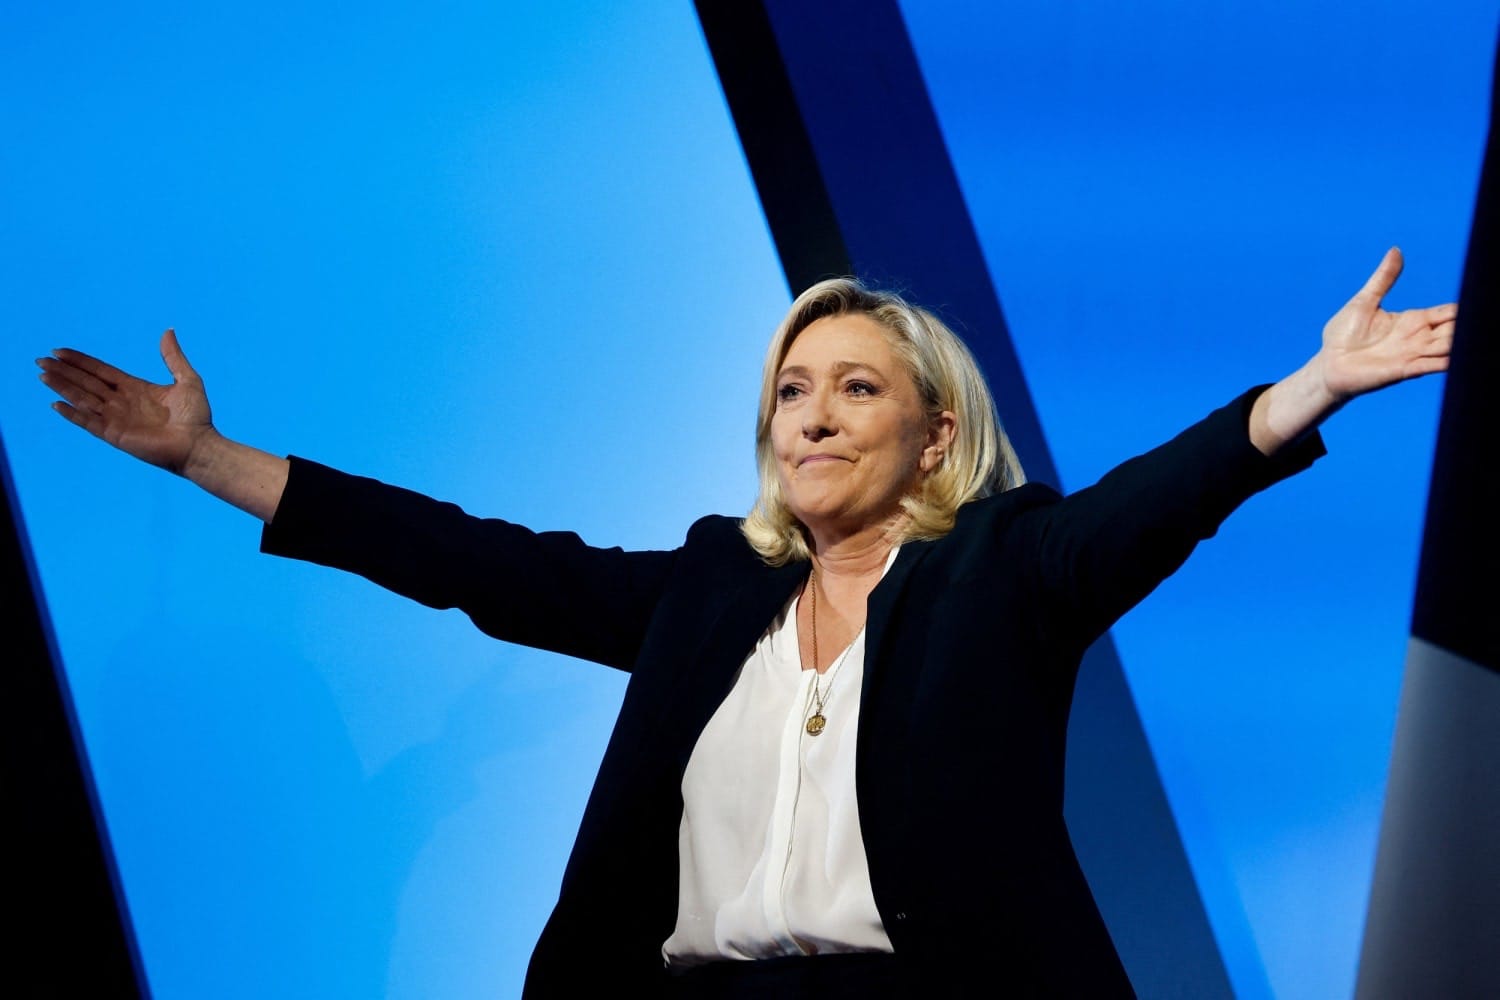 France's Far Right Scores Major Victory Amid Popular Support and Leftist Unrest